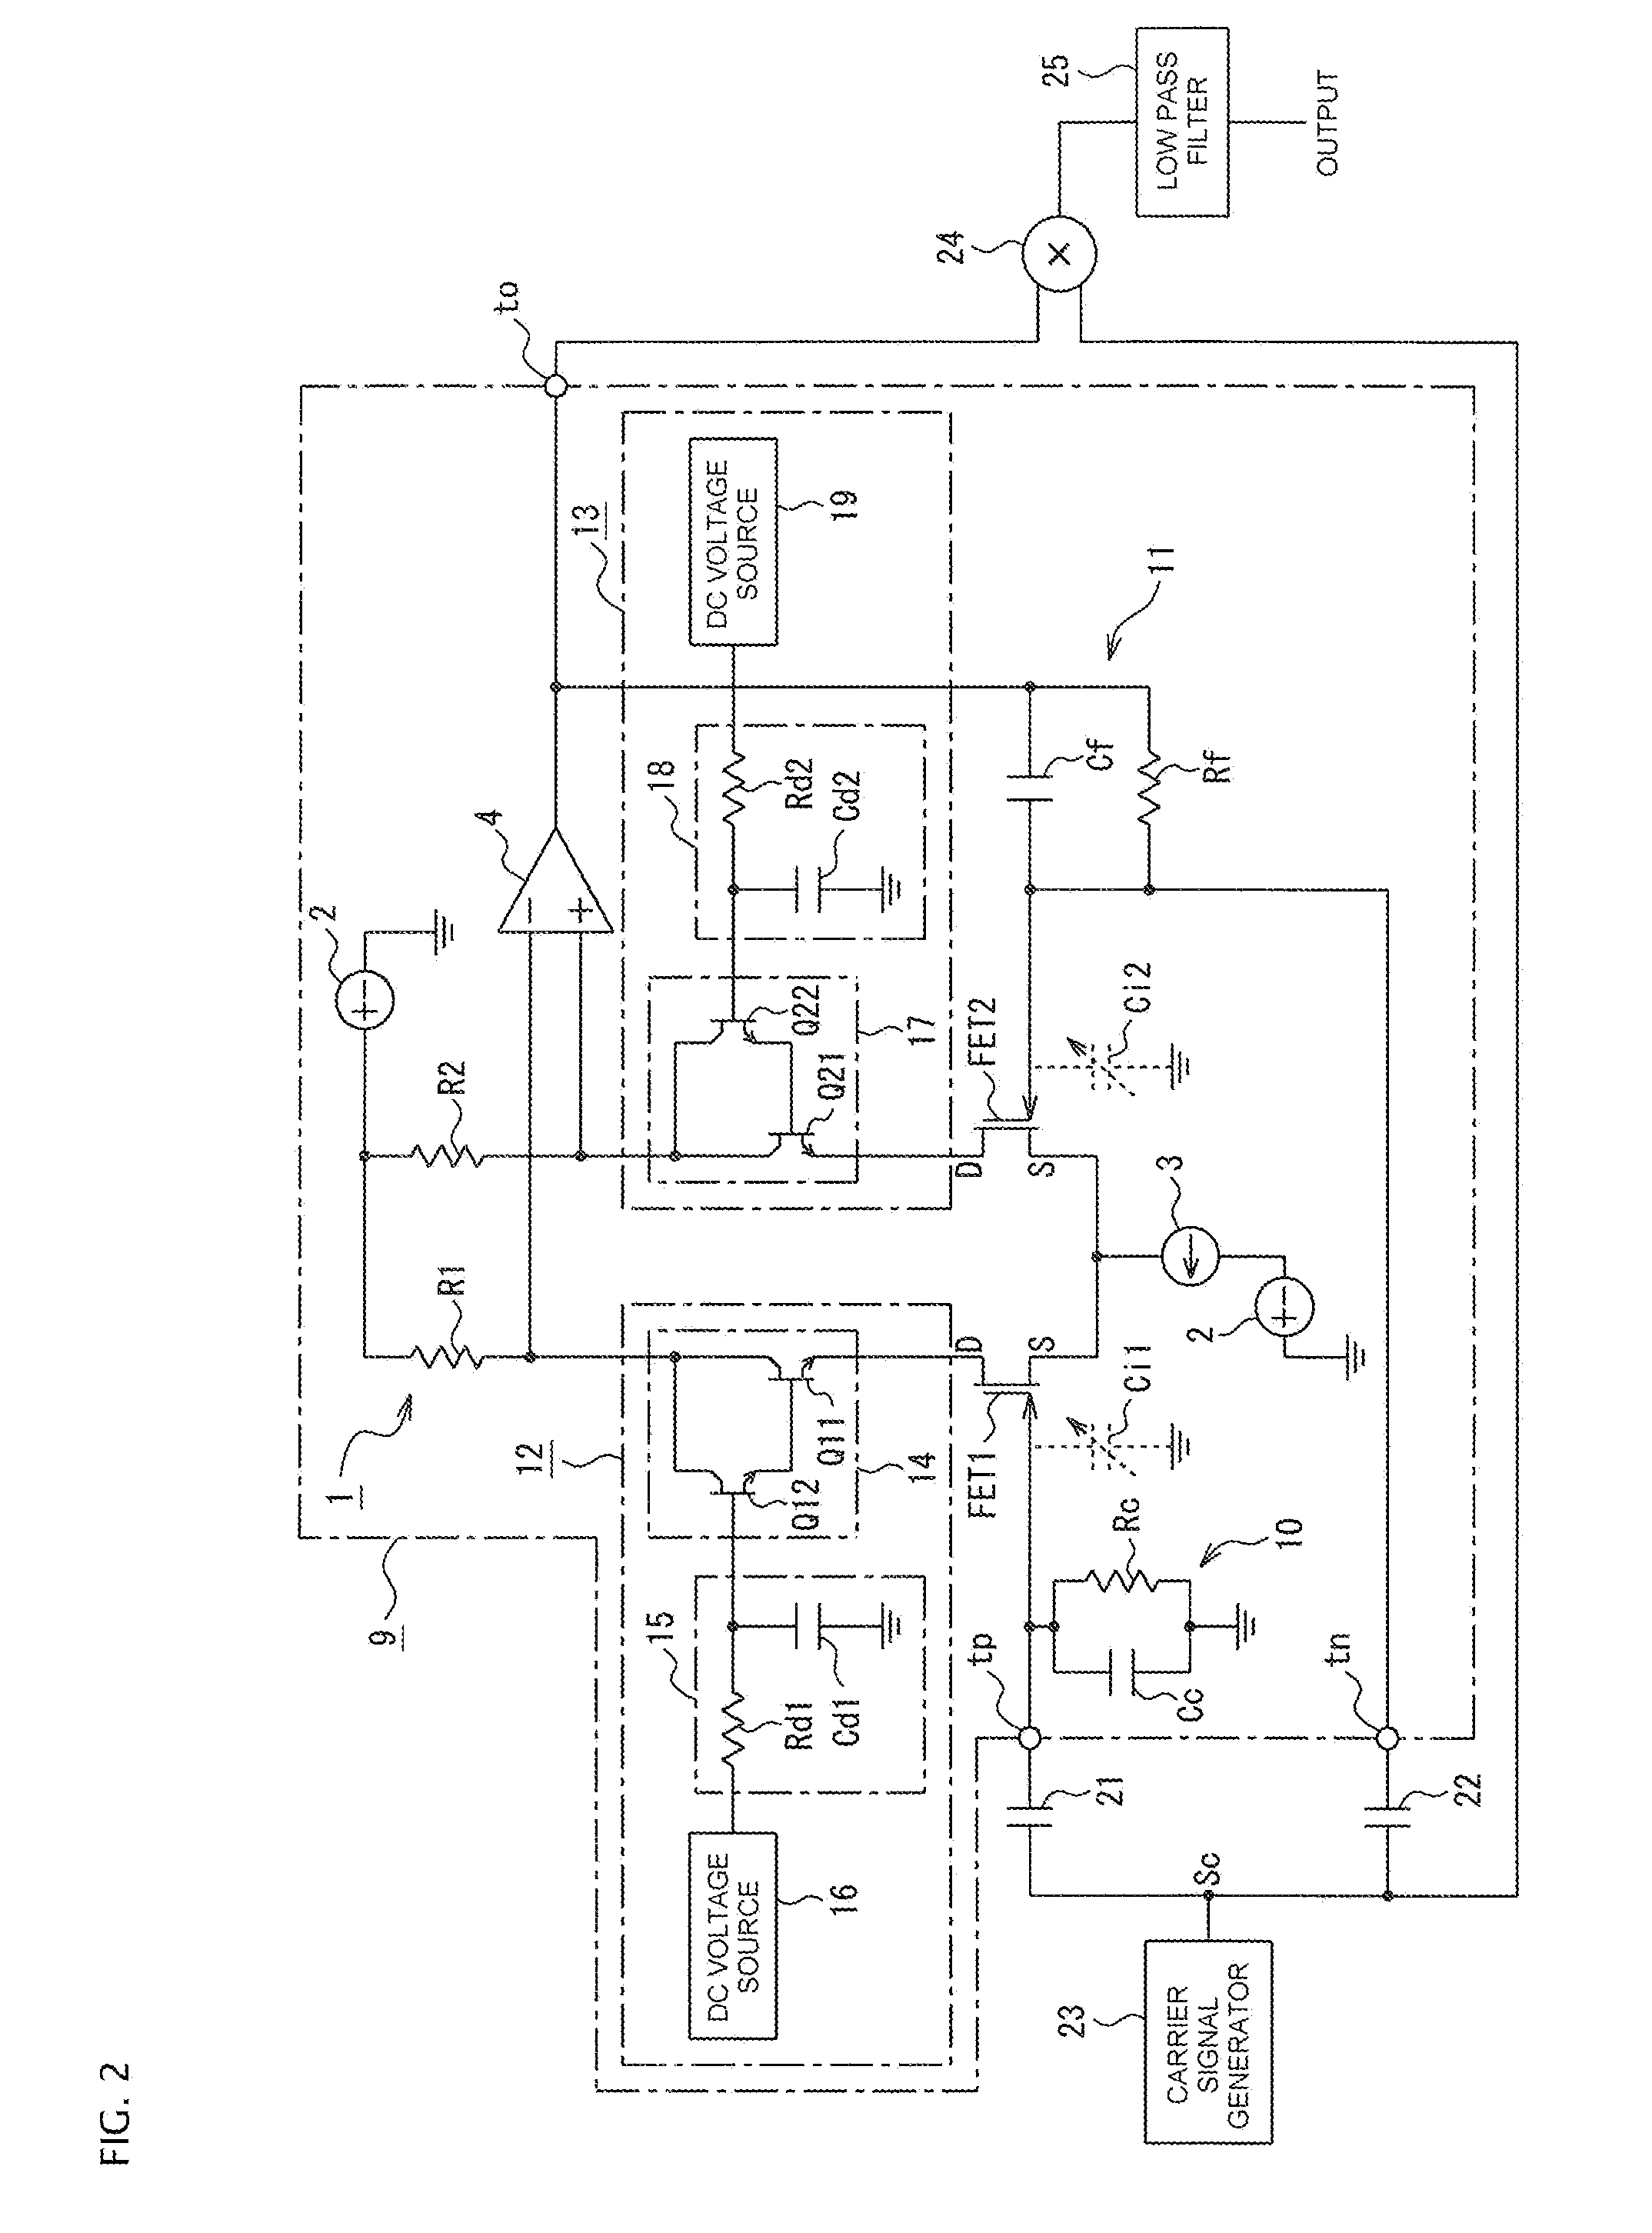 Electric charge detection circuit